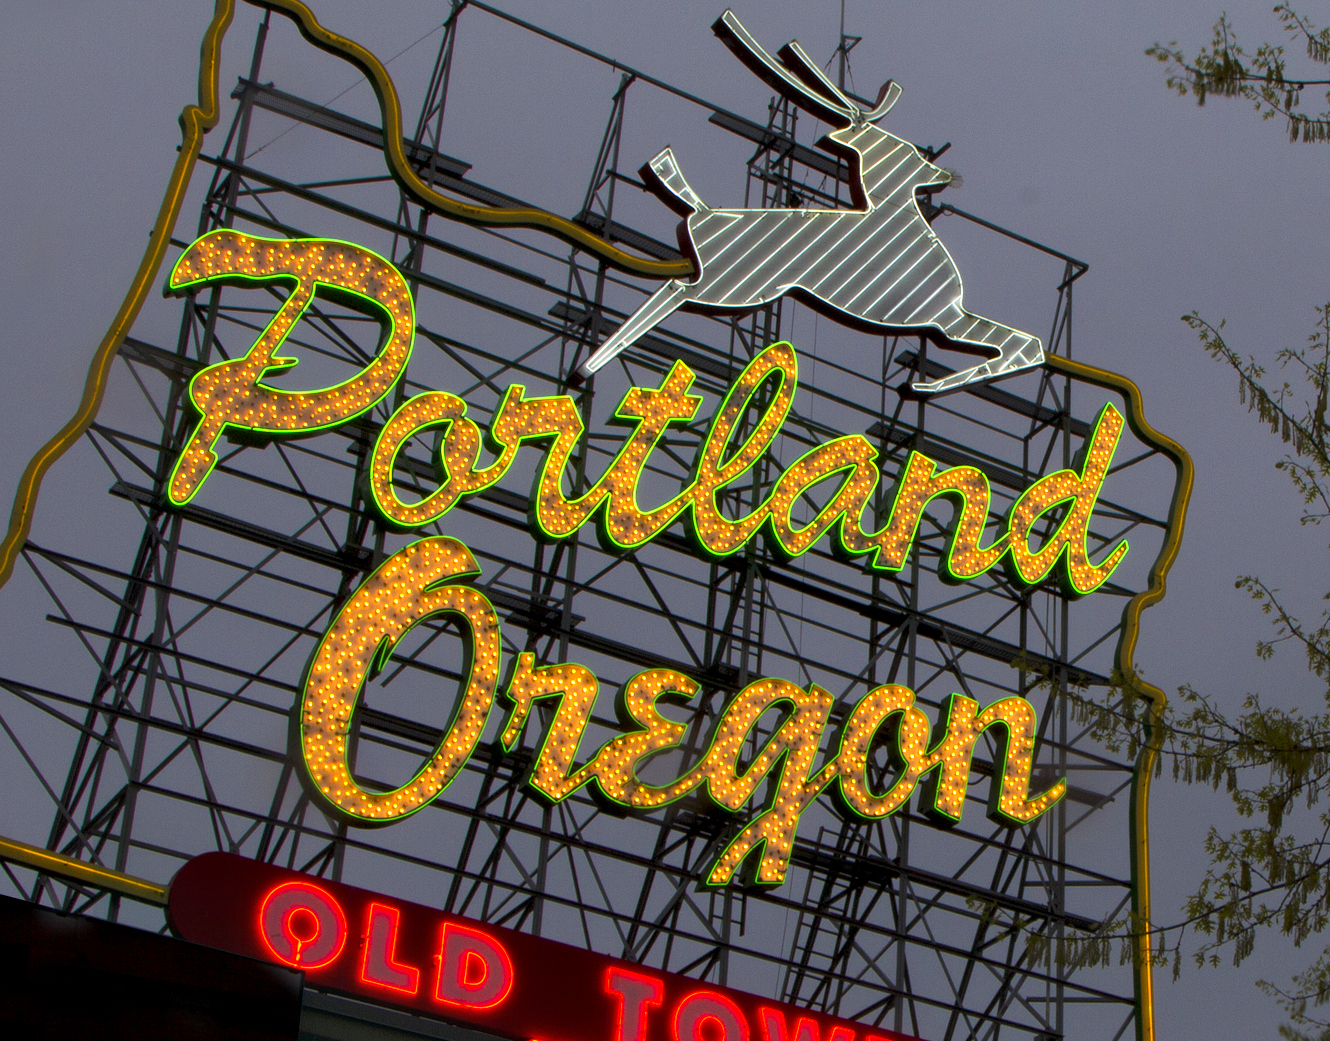 What is there to do in Portland, Ore.?